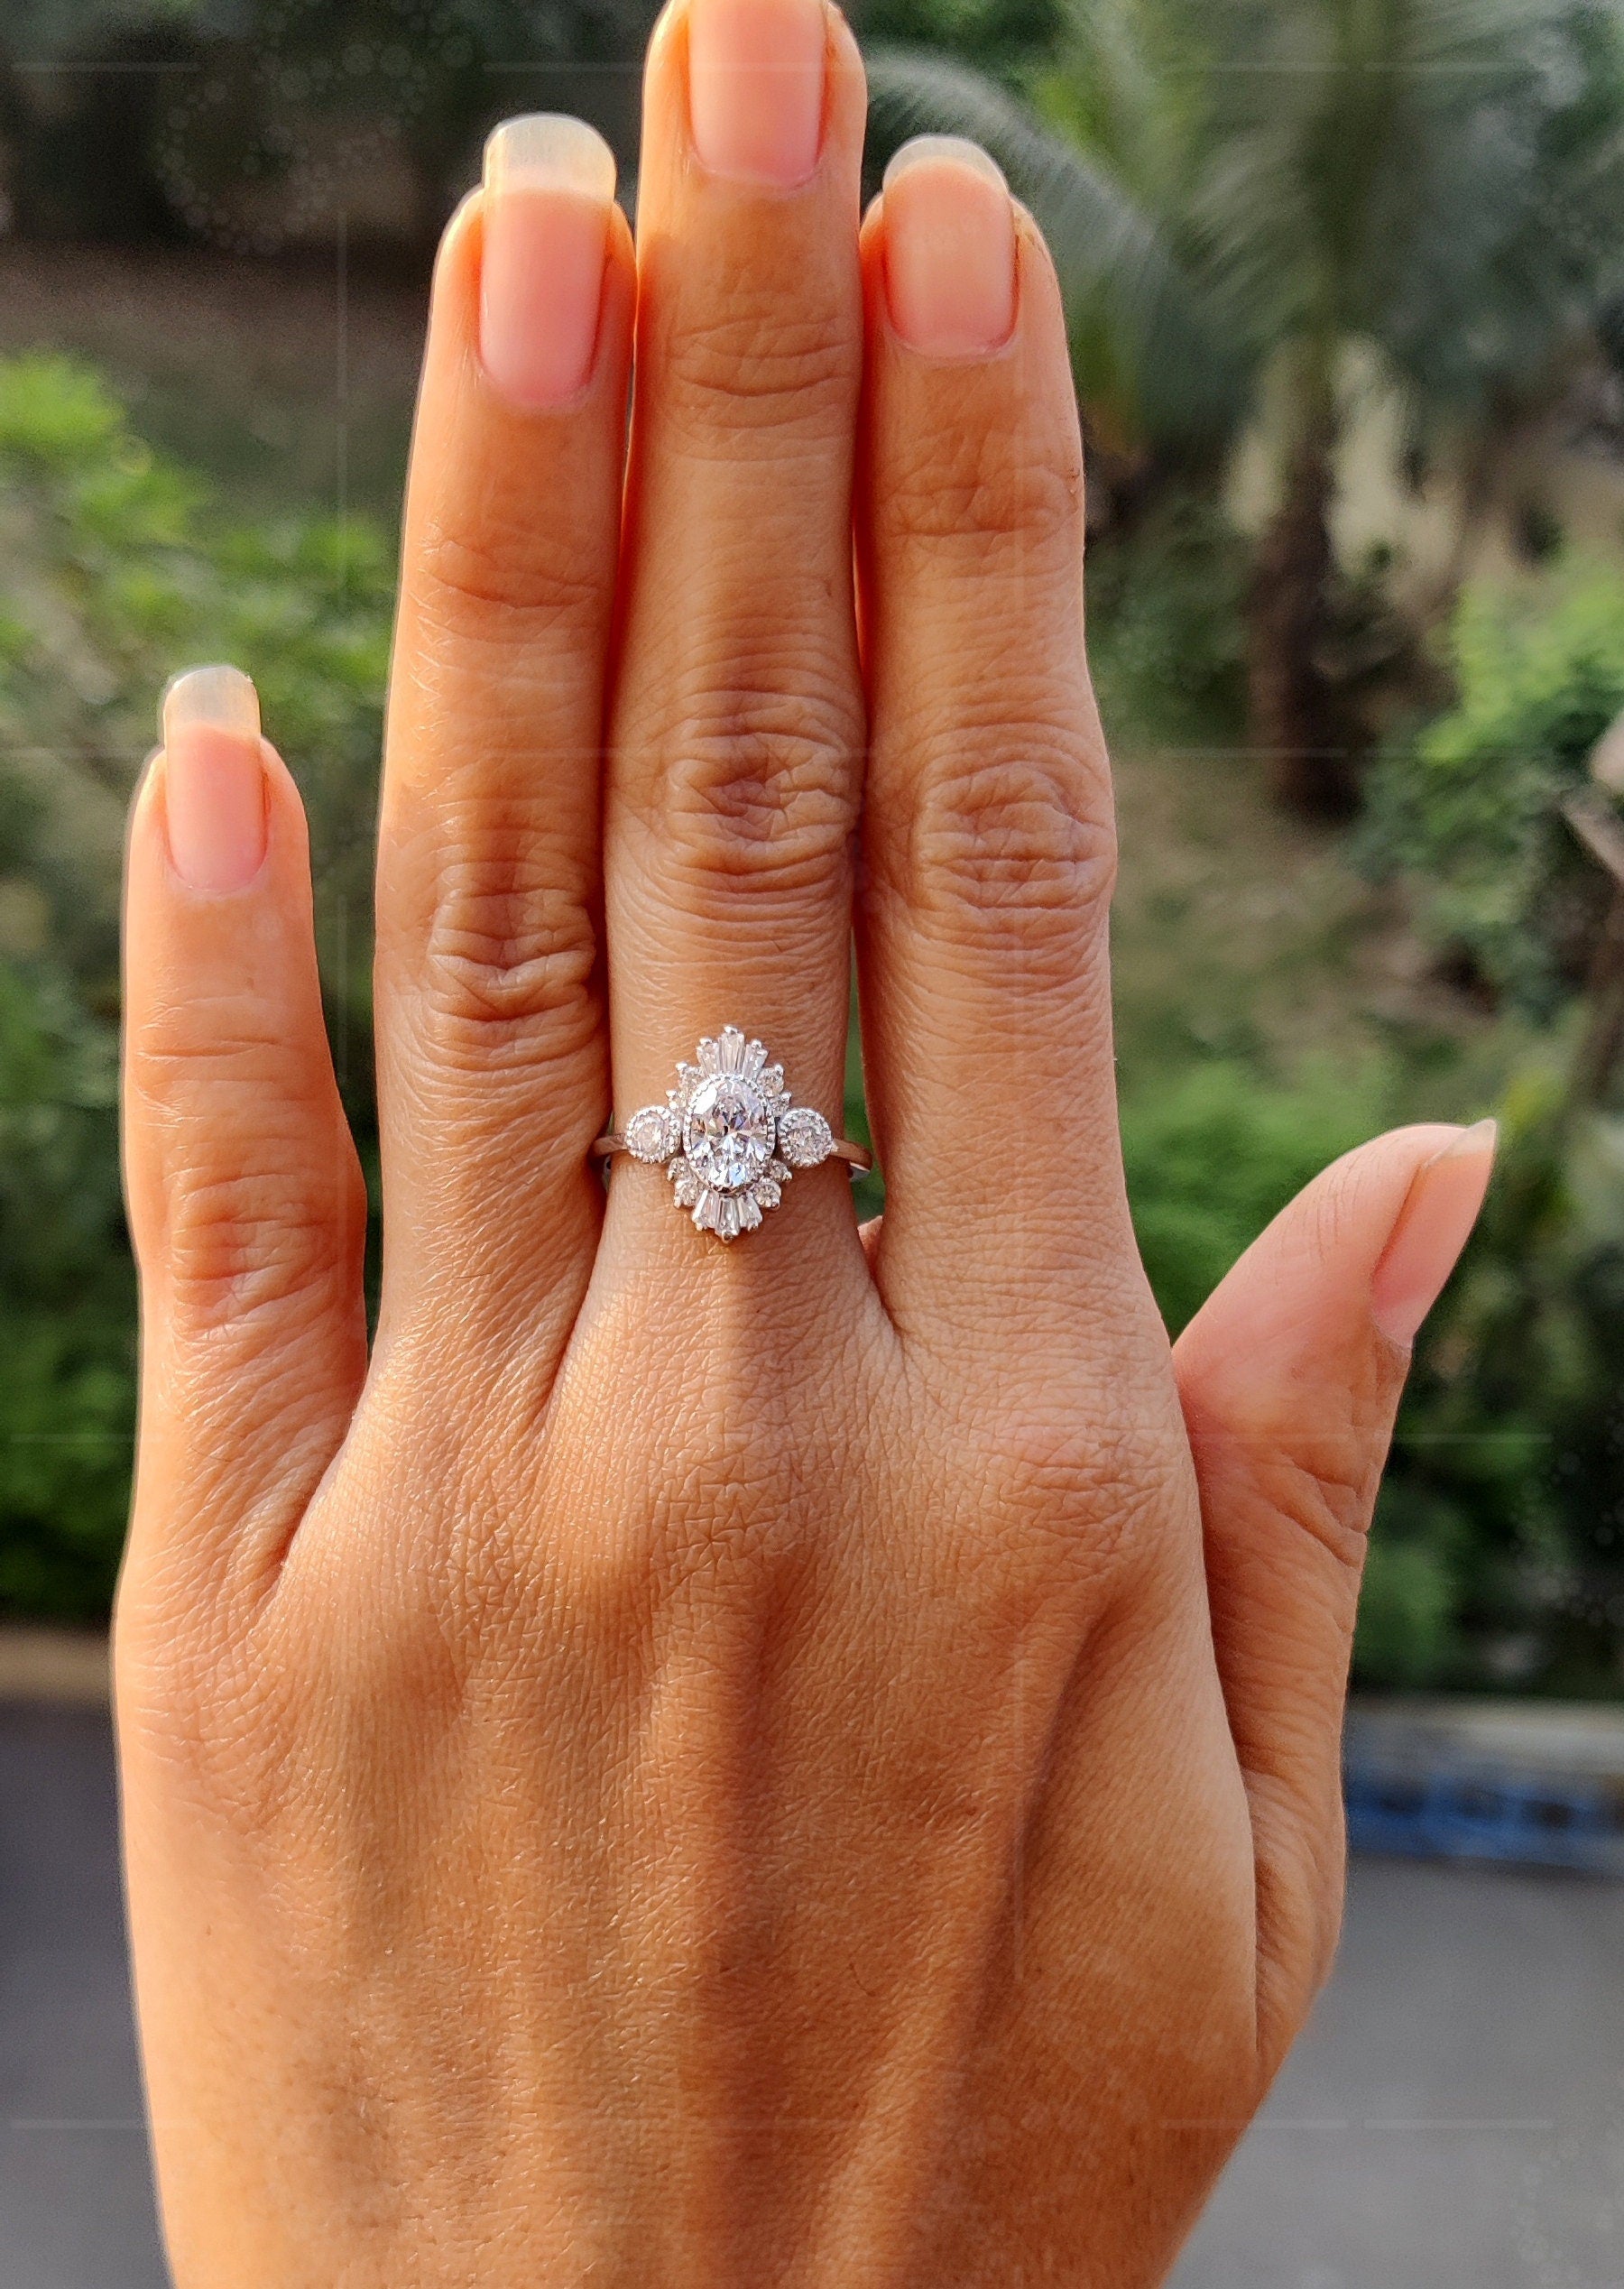 Oval Moissanite Starburst Halo Engagement Ring: A Vintage Art Deco Marvel in Silver and Gold, Perfect for Timeless Elegance